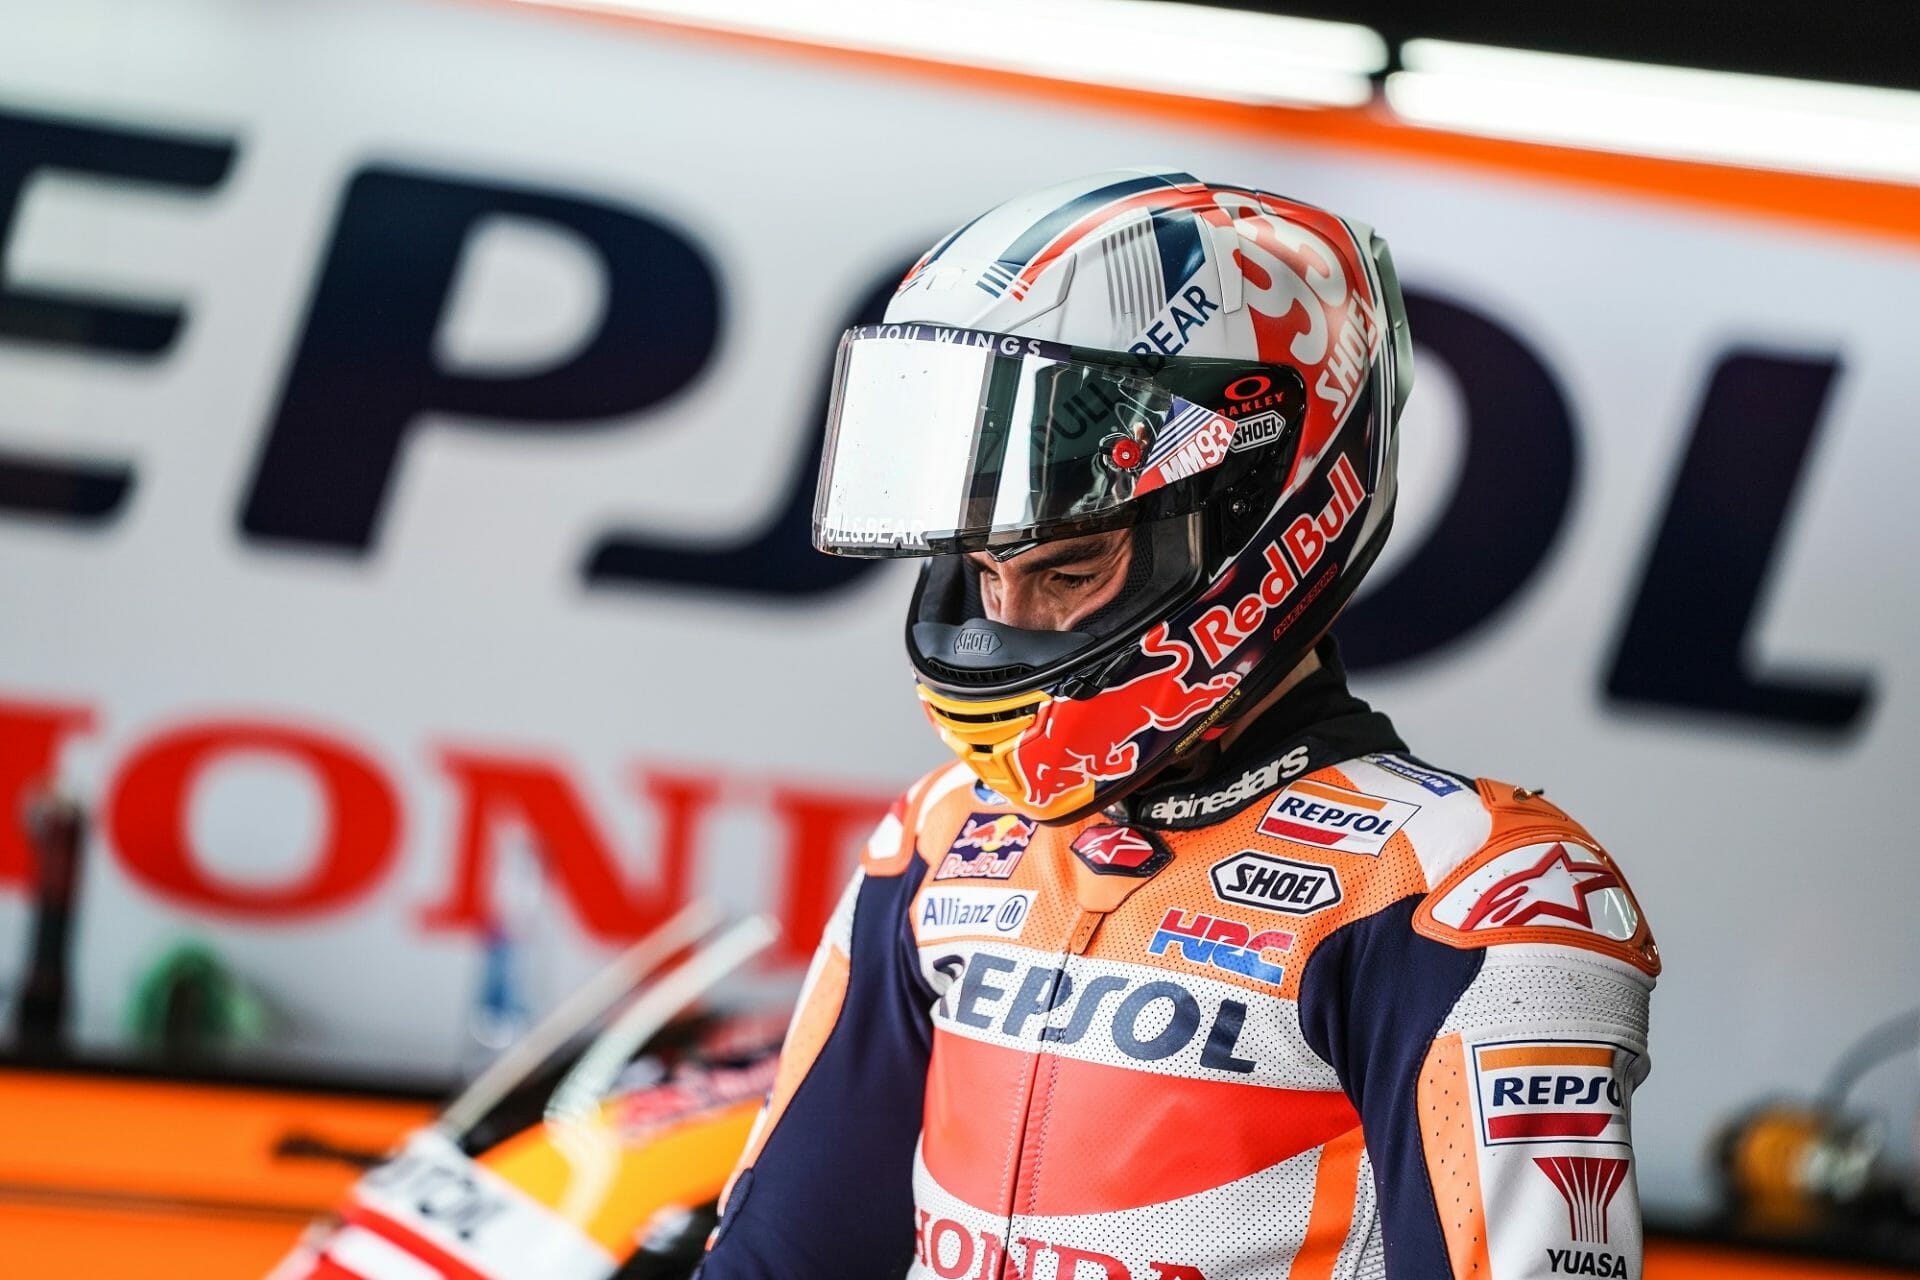 Marquez first positive examination after 4th operation - MOTORCYCLES.NEWS